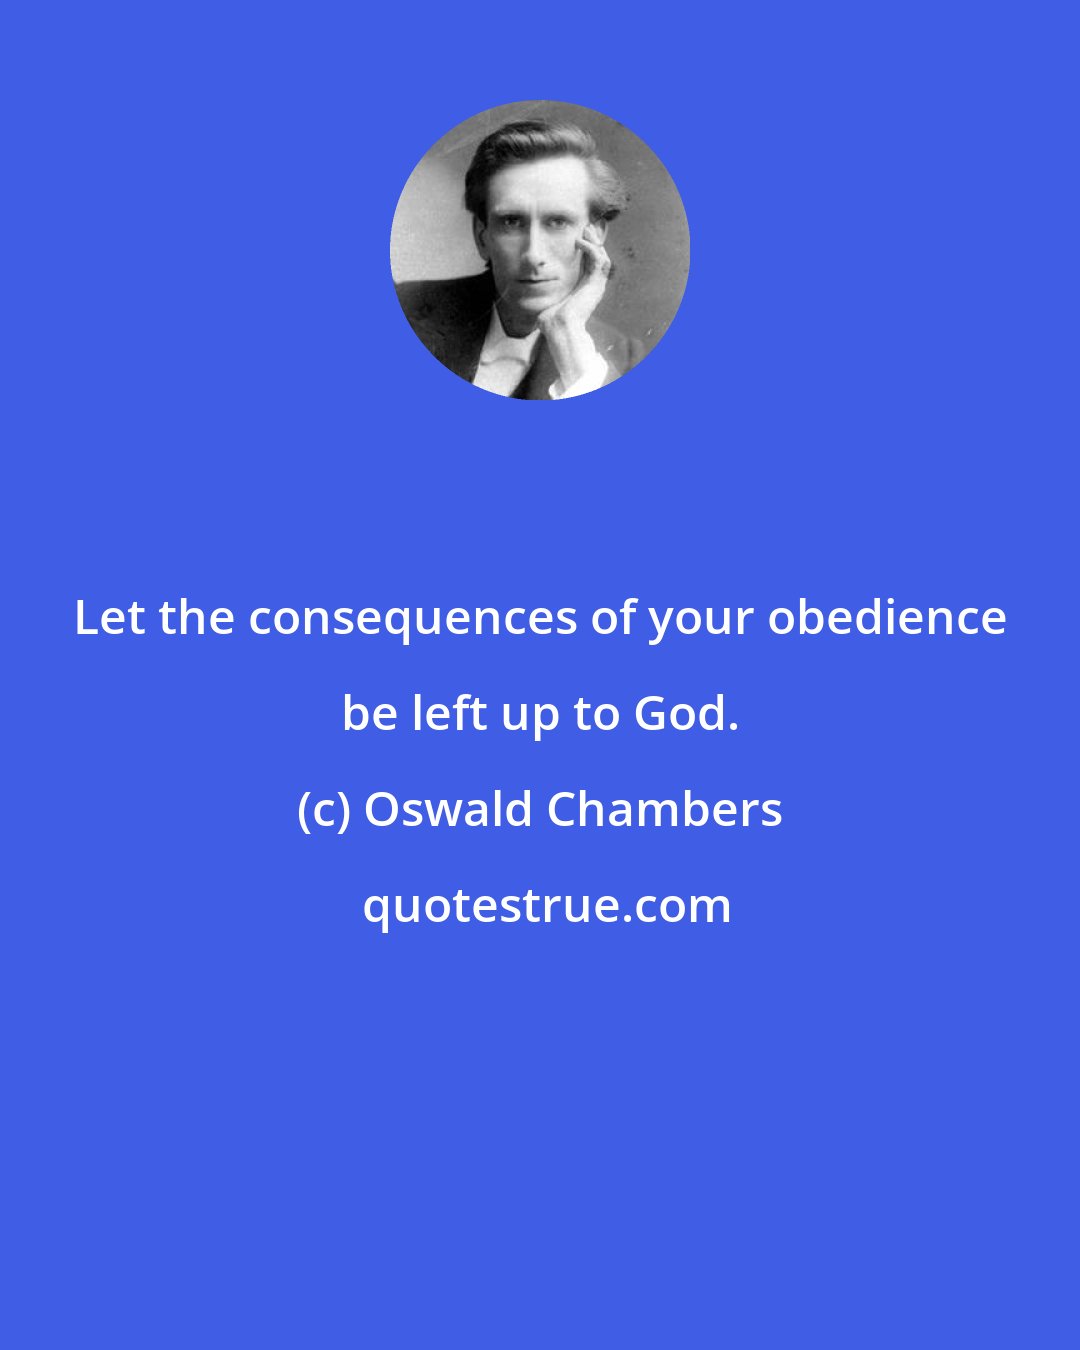 Oswald Chambers: Let the consequences of your obedience be left up to God.